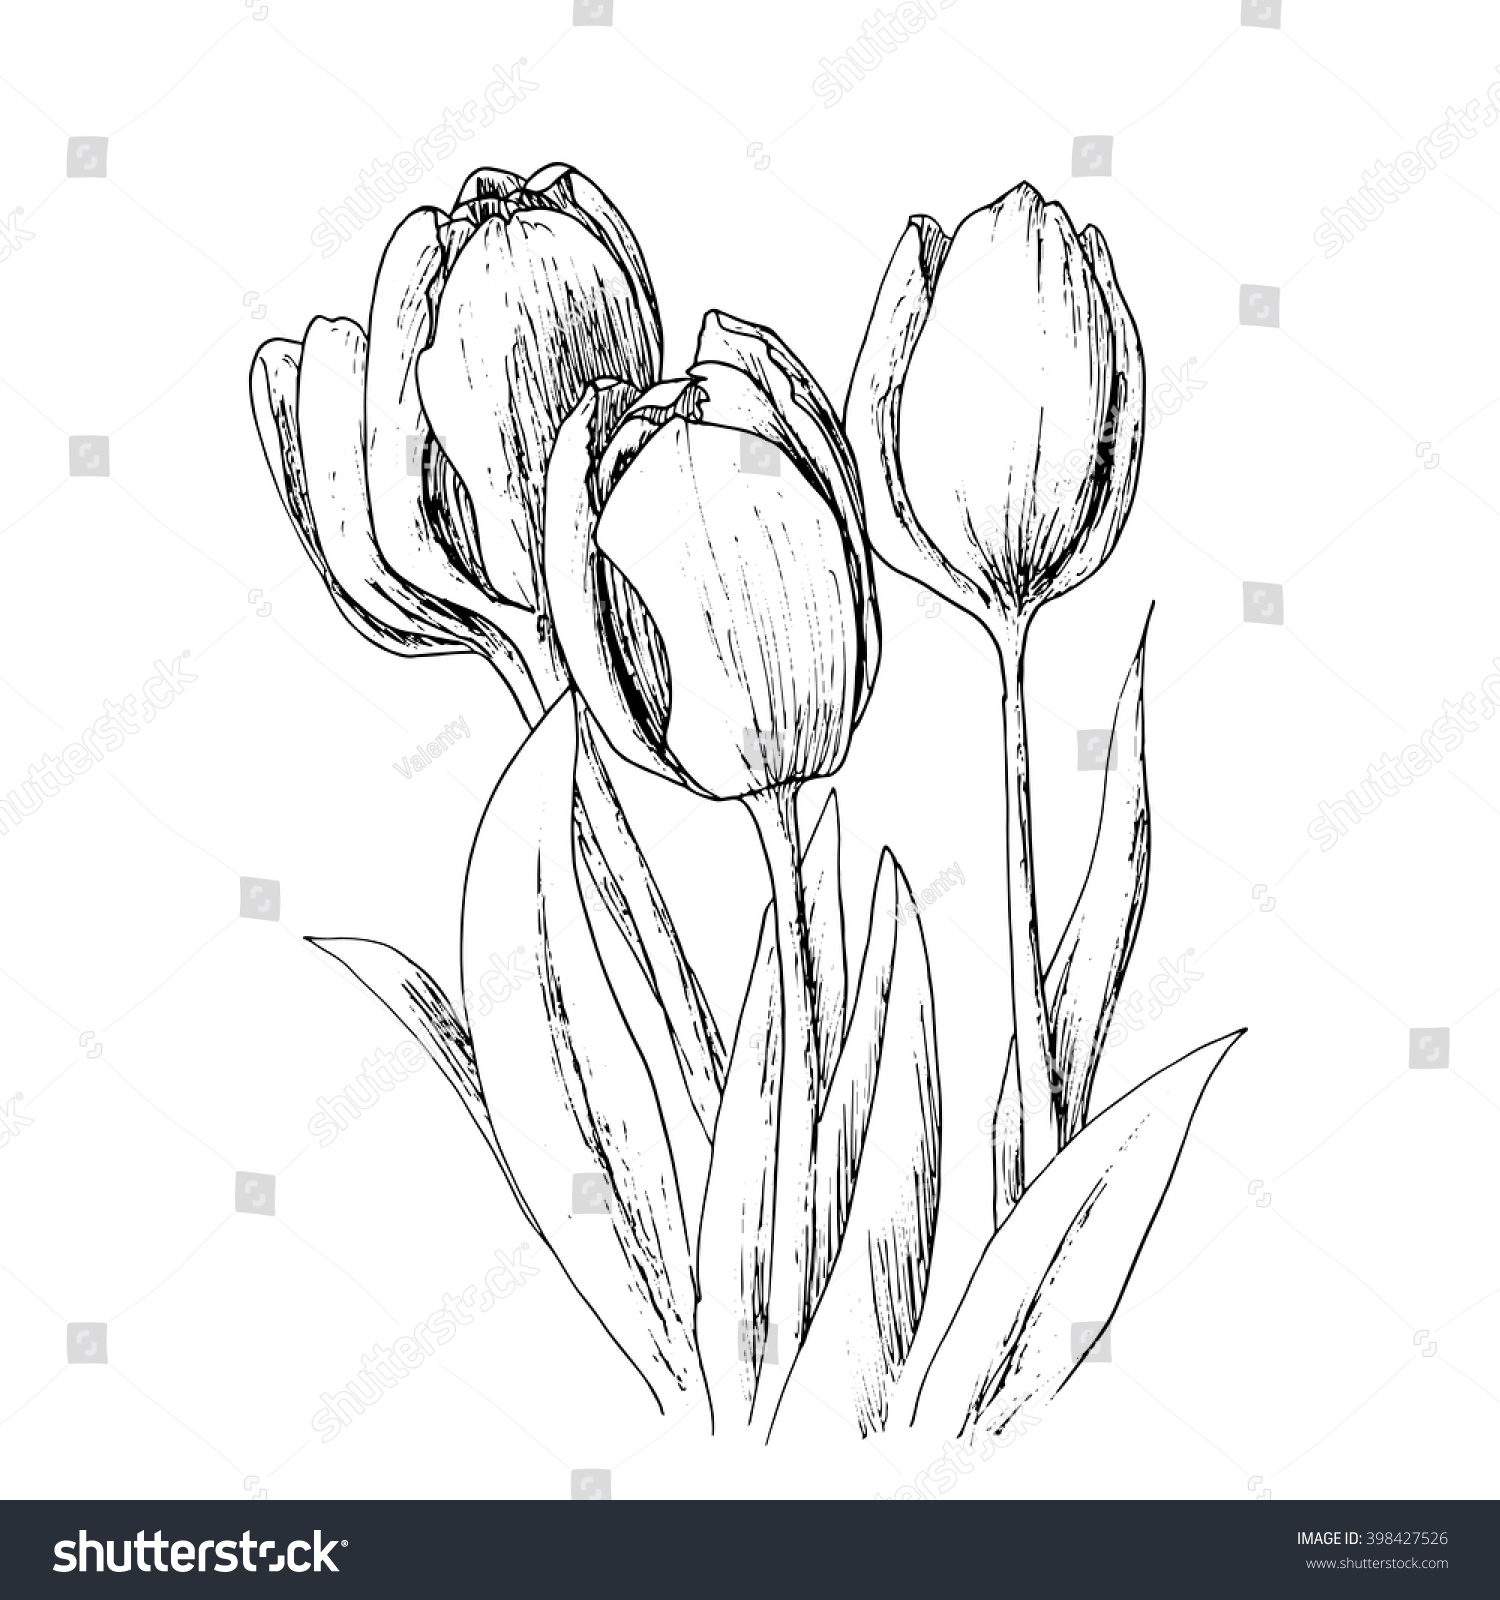 Holland Tulips On A White Background. Vector. Hand Drawn Artwork. Love ...